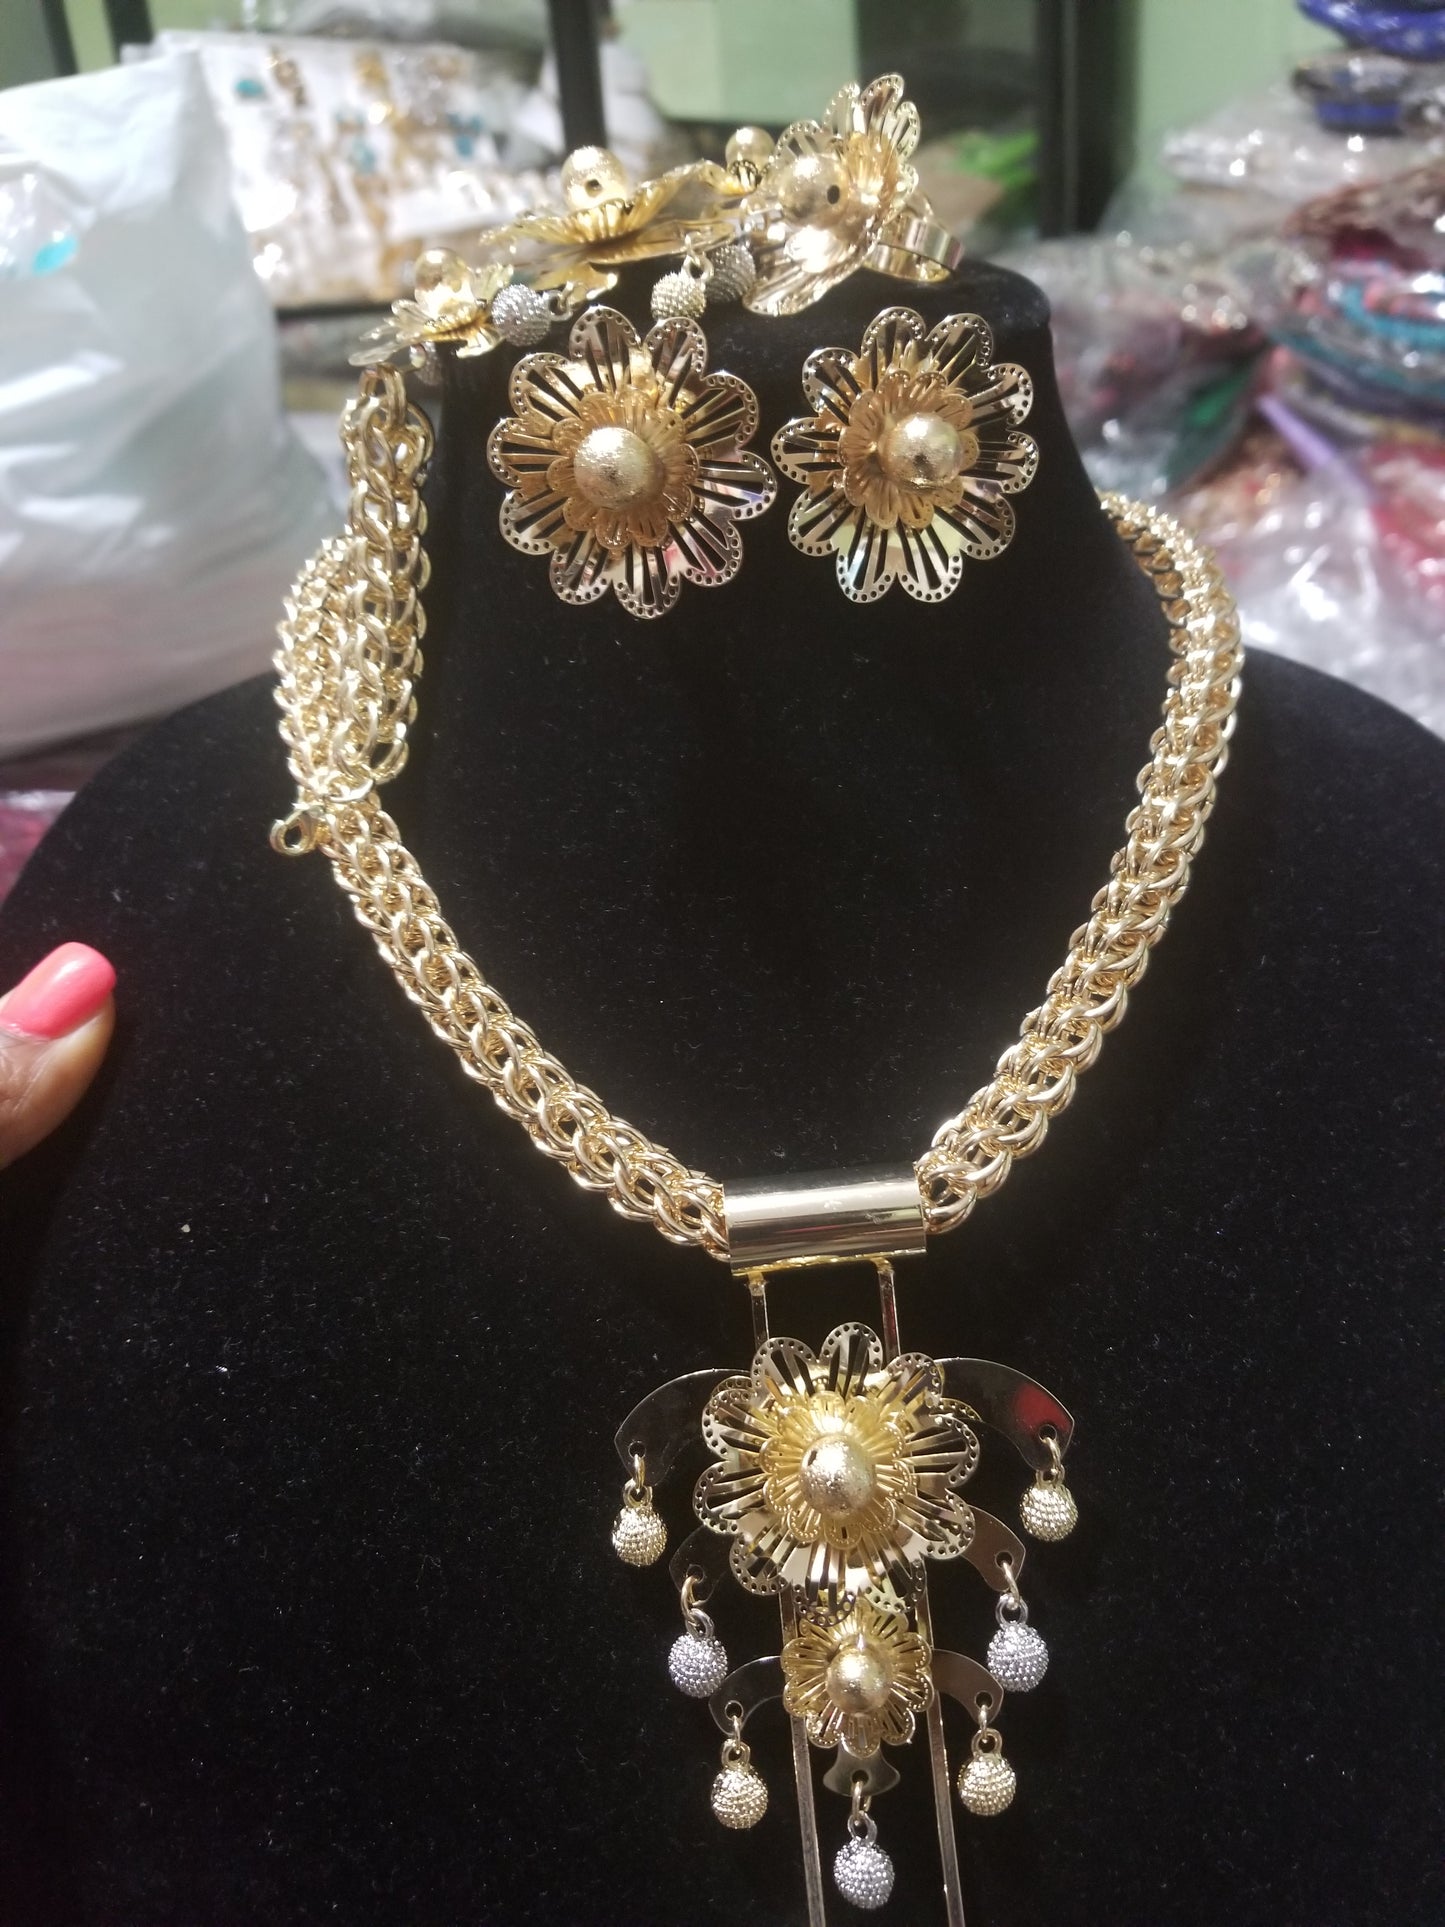 Top quality costume Dubai jewelry set in 18k gold plating. High quality hypoallergenic jewelry set. 4pcs set. One size fit ring. African party jewelry set